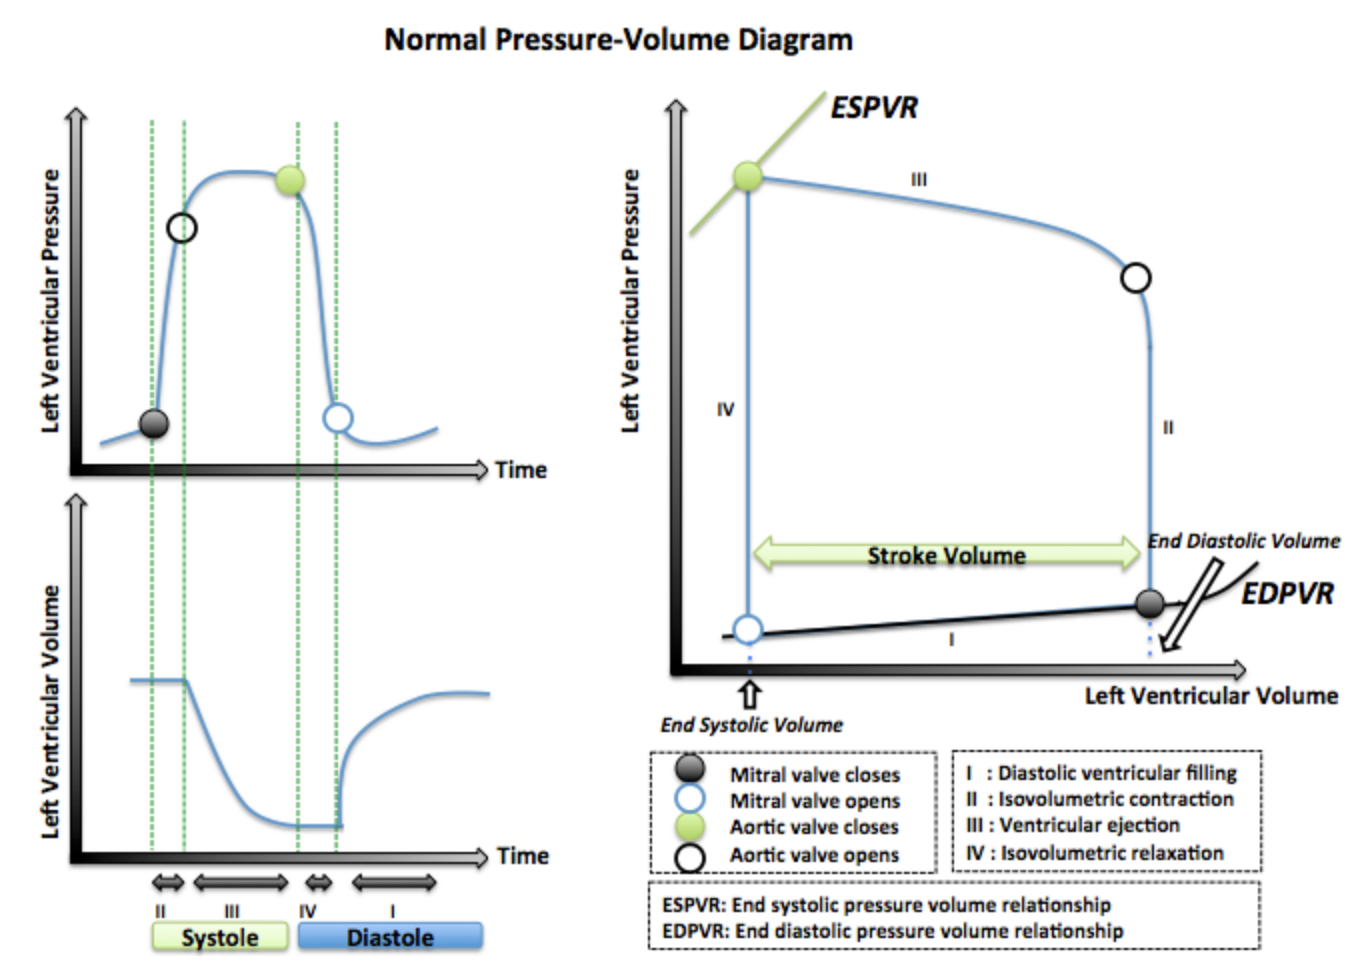 A comparison between the two types of standard Pressure-Volume Diagram. The separated graphs of left ventricle volume and pressure against time and phase of the cardiac cycle are compared to the left ventricle pressure-volume loop. Both illustrations depict the relationship between blood volume and pressure that allows for systole and diastole to occur in each cardiac cycle.